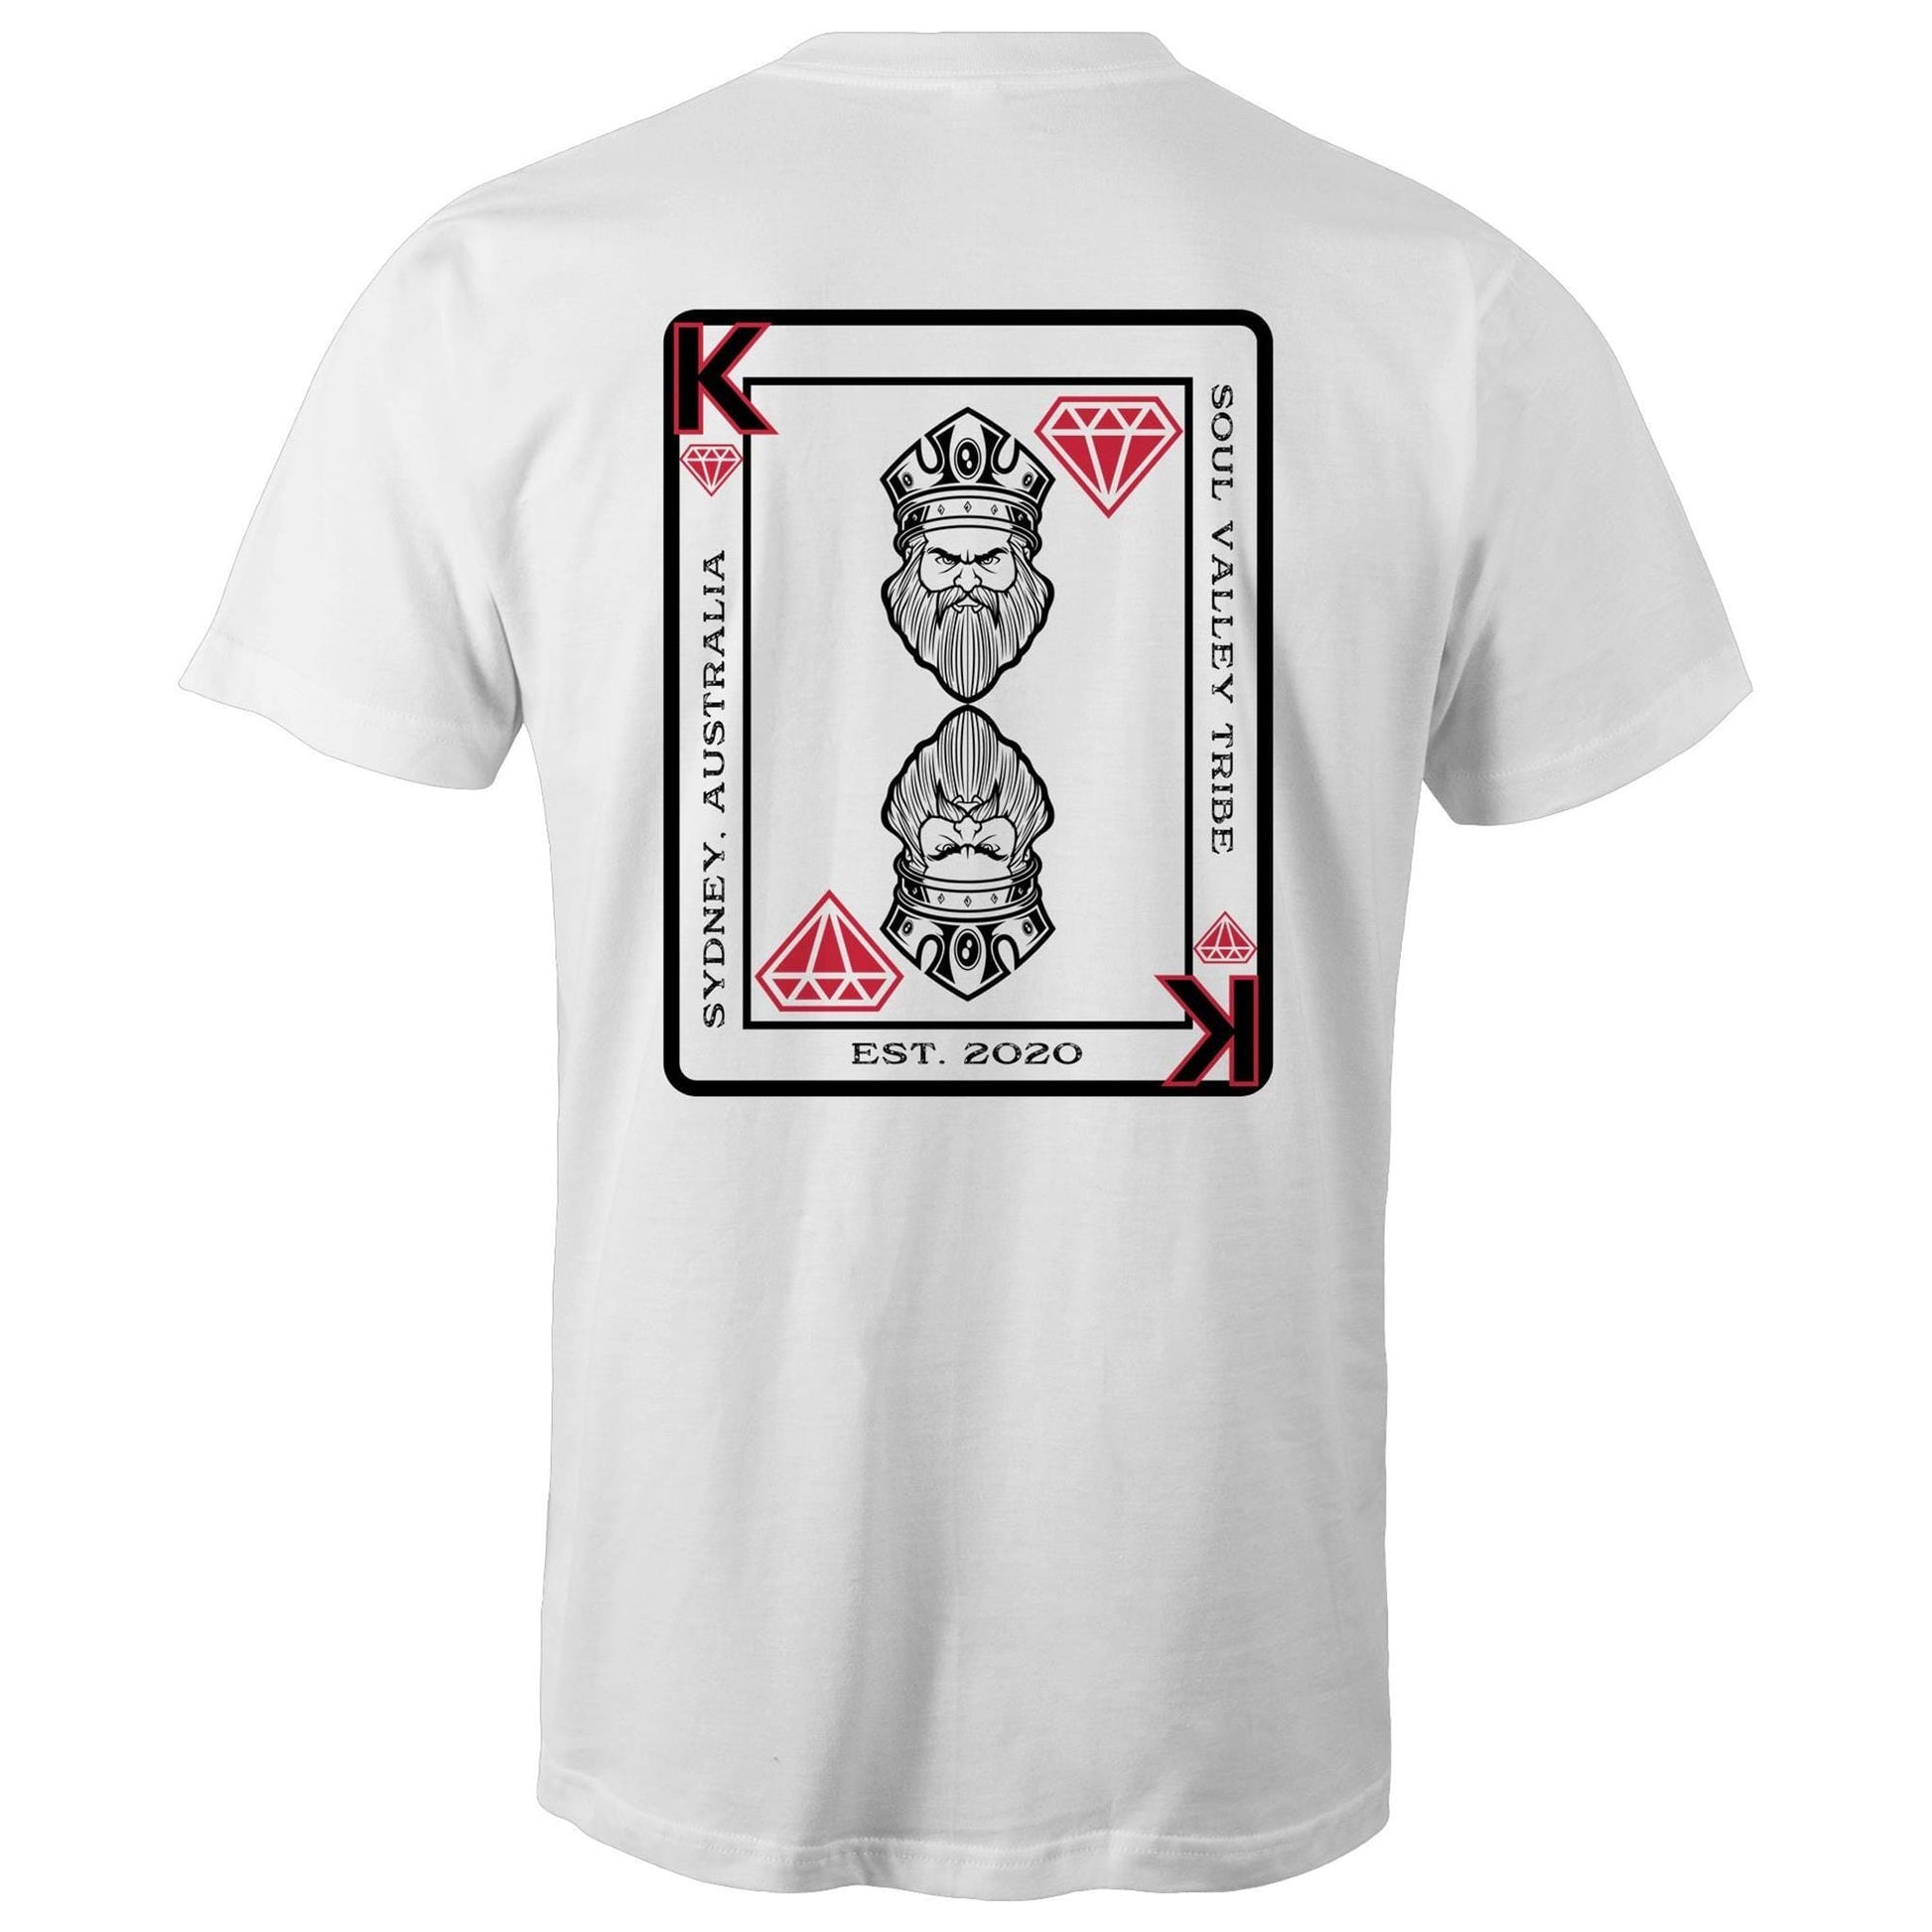 soulvalleytribe King of Diamonds Tee - Sizes 3XL-5XL Shirts & Tops